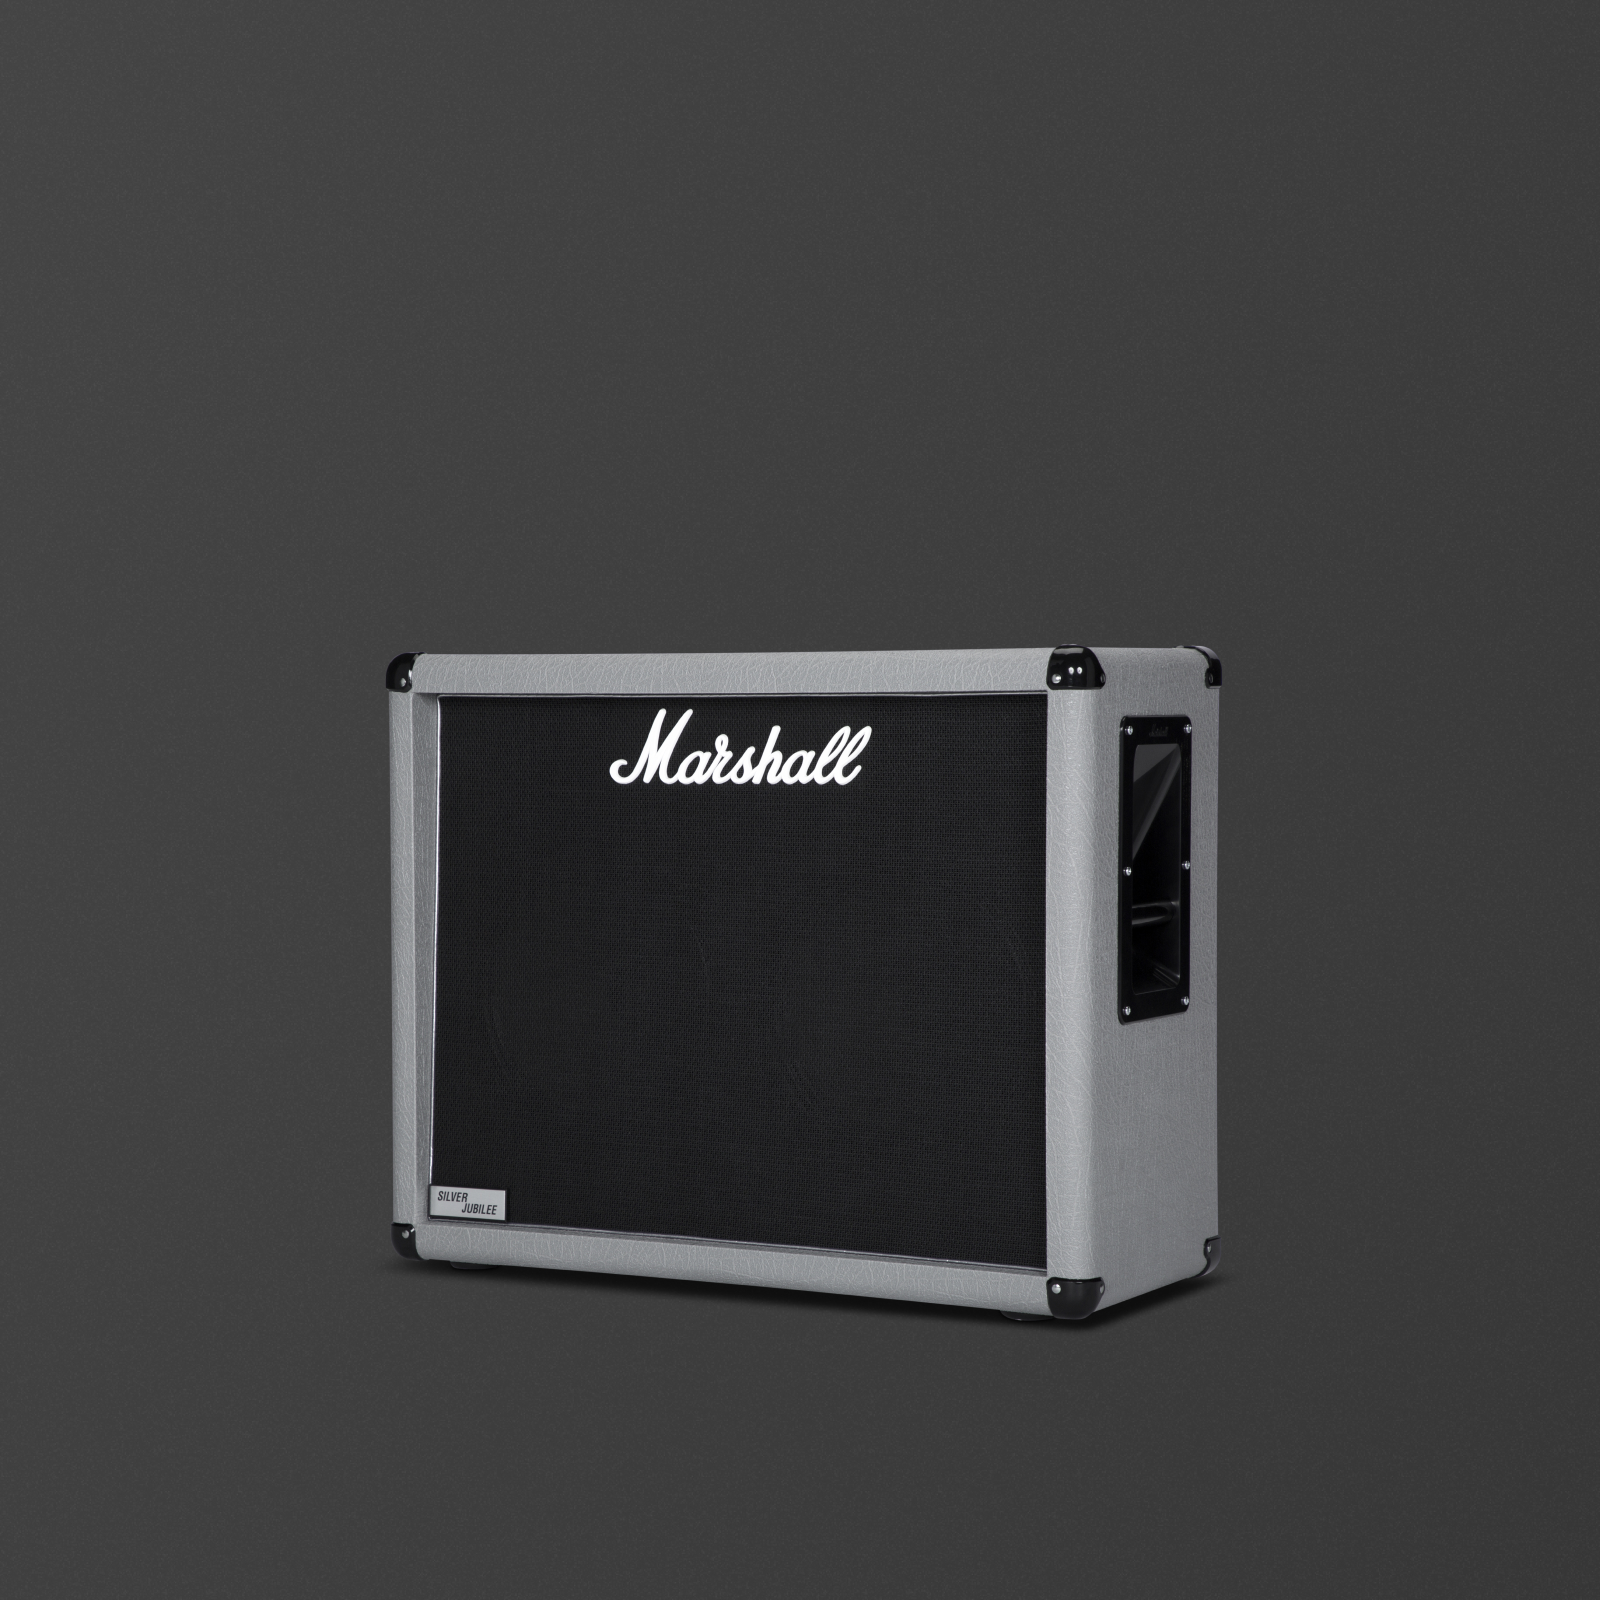 Marshall's 2536 black and silver cabinet.  